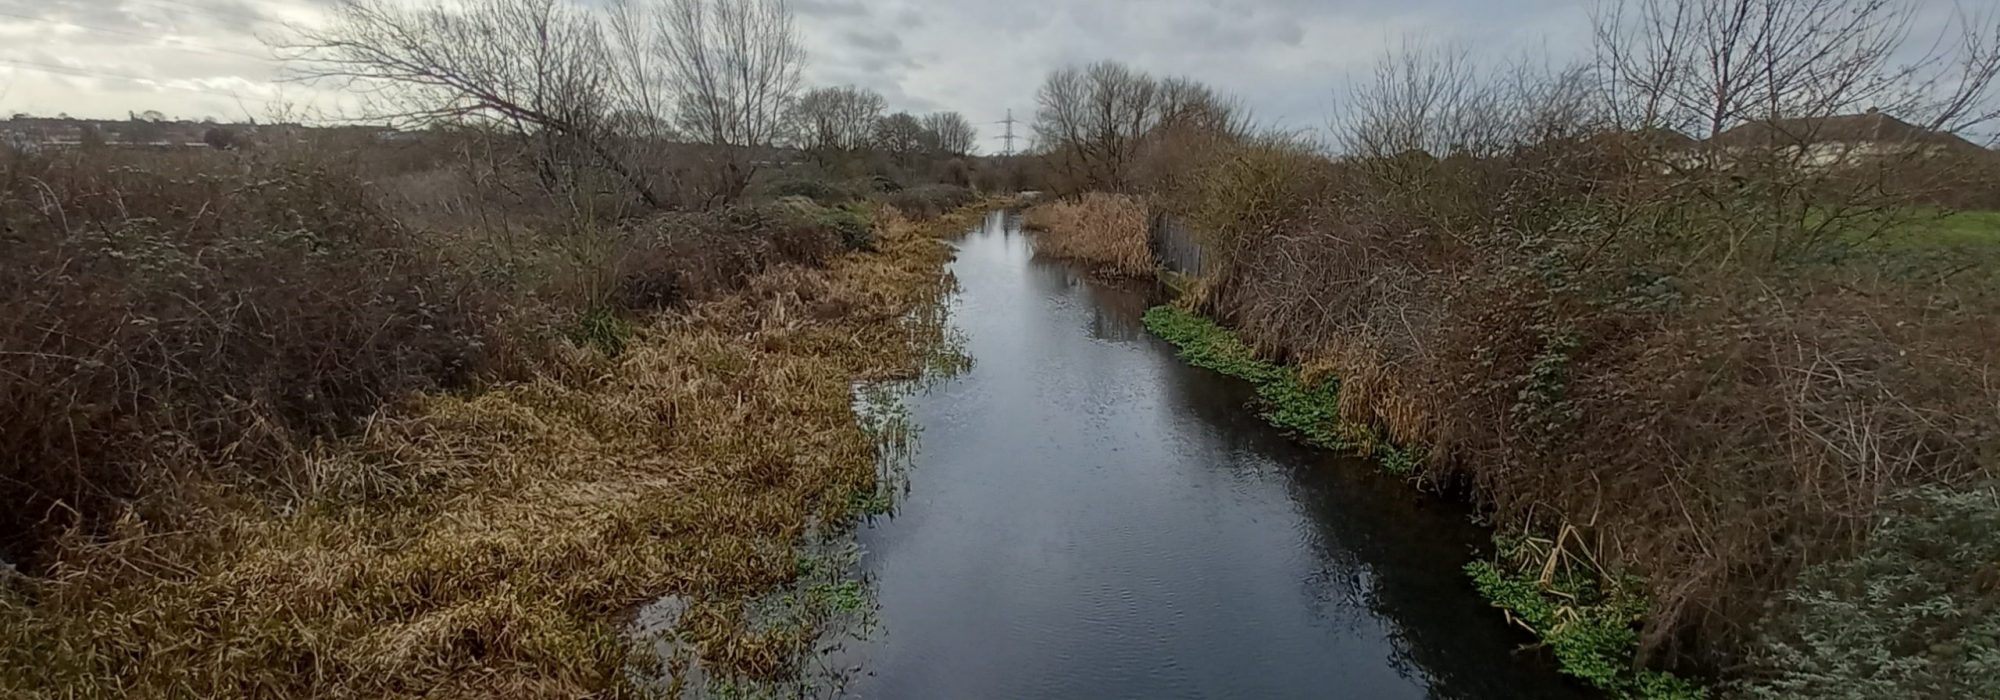 the river cray seen from a bridge on a stormy day